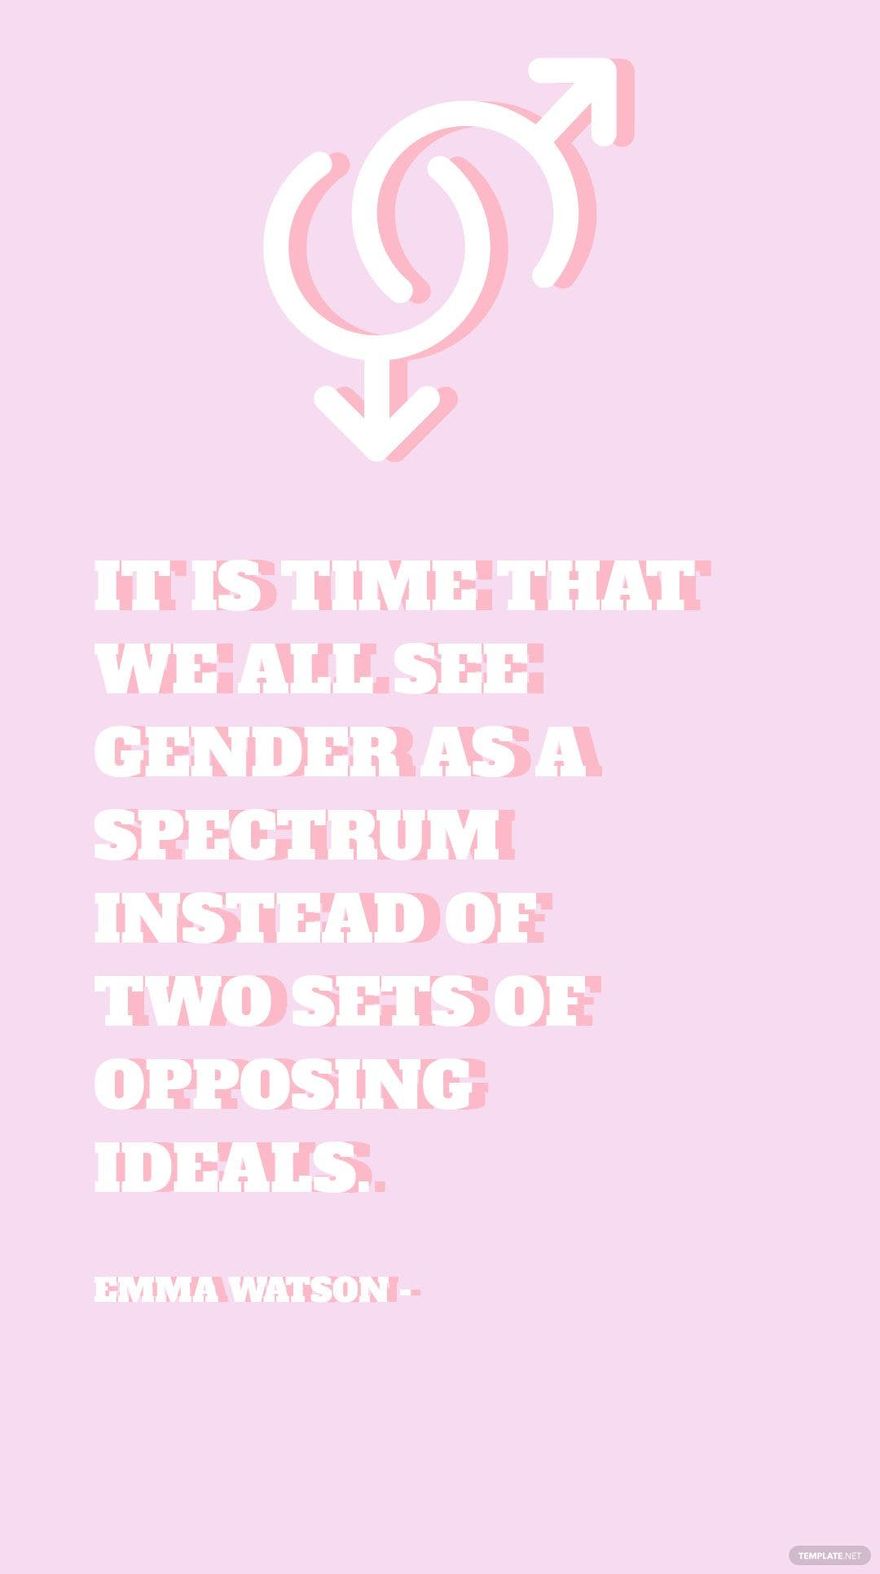 Free Emma Watson - It is time that we all see gender as a spectrum instead of two sets of opposing ideals.